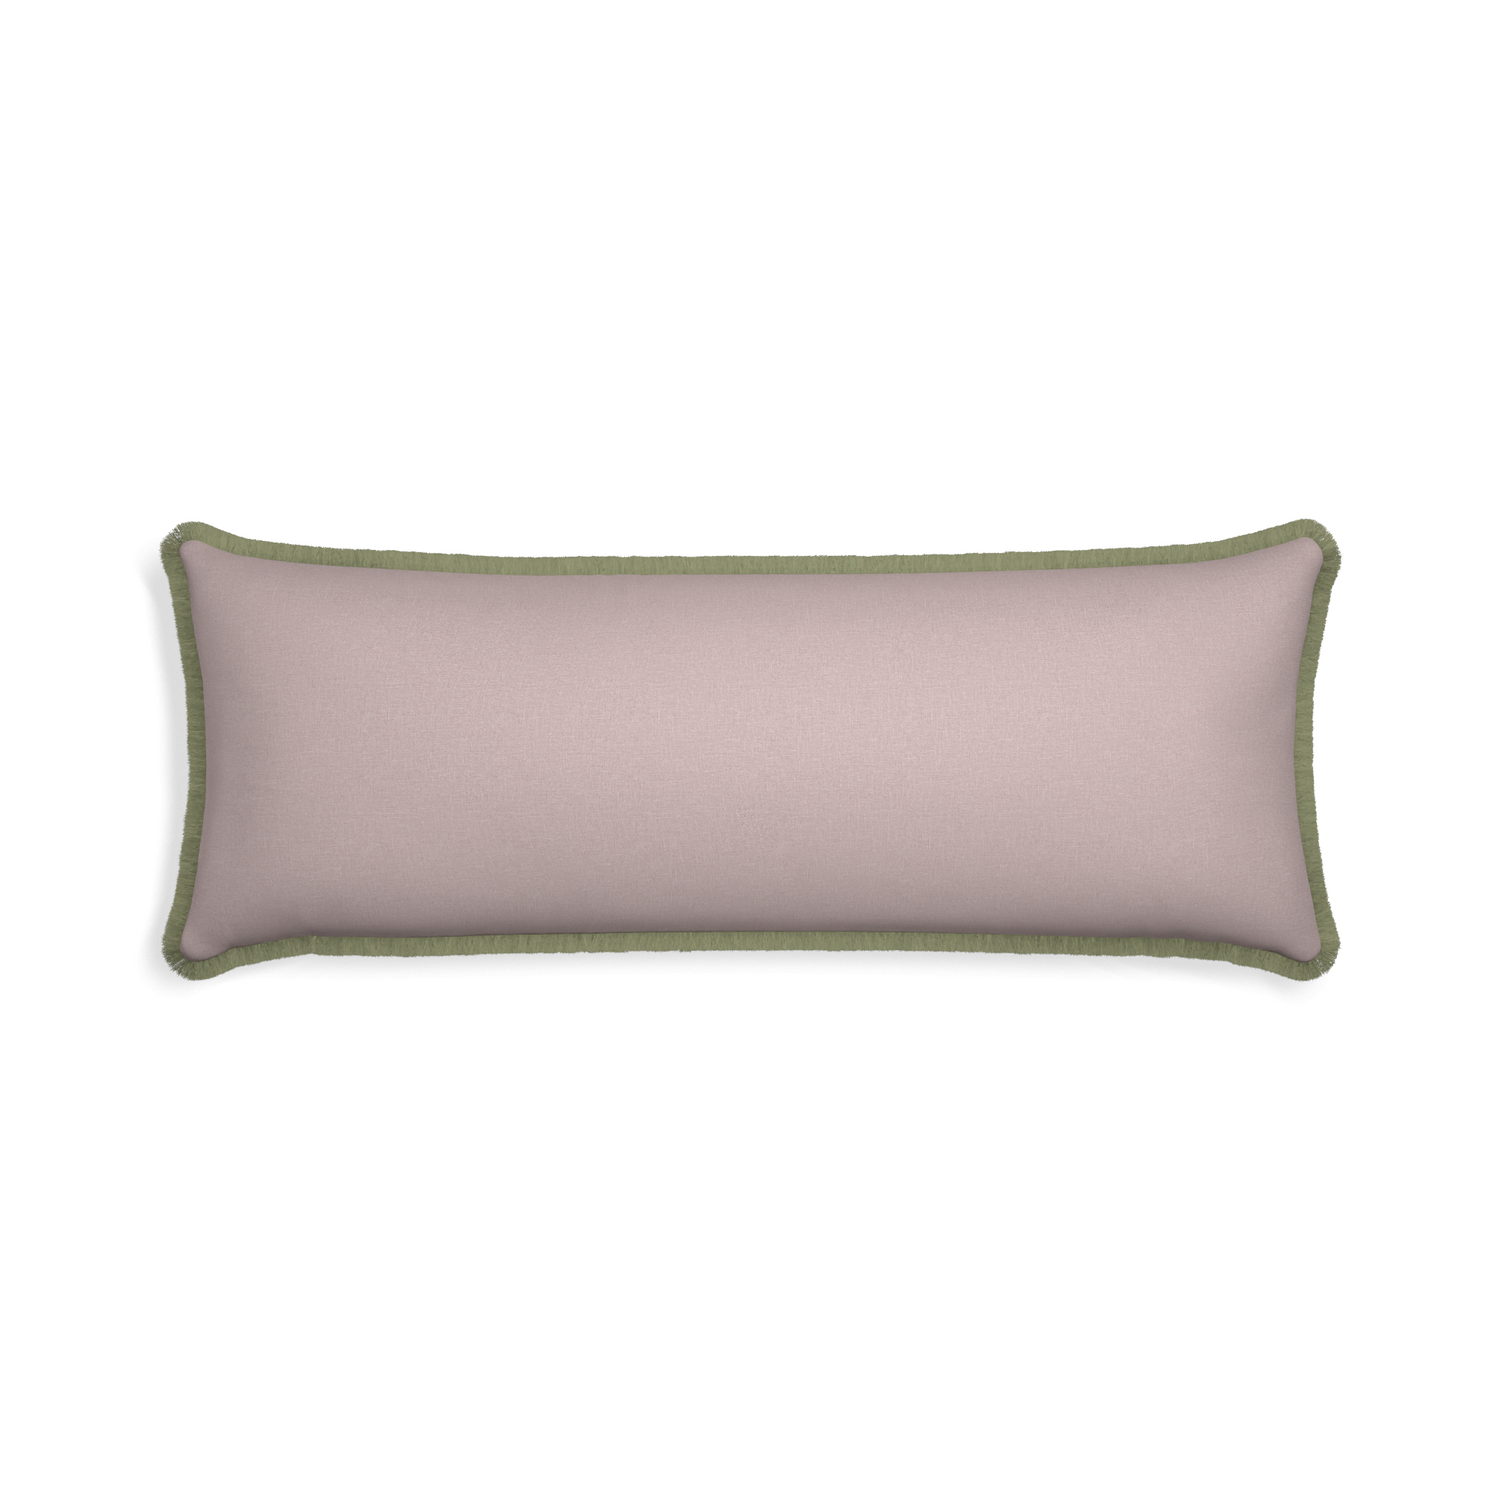 Xl-lumbar orchid custom mauve pinkpillow with sage fringe on white background